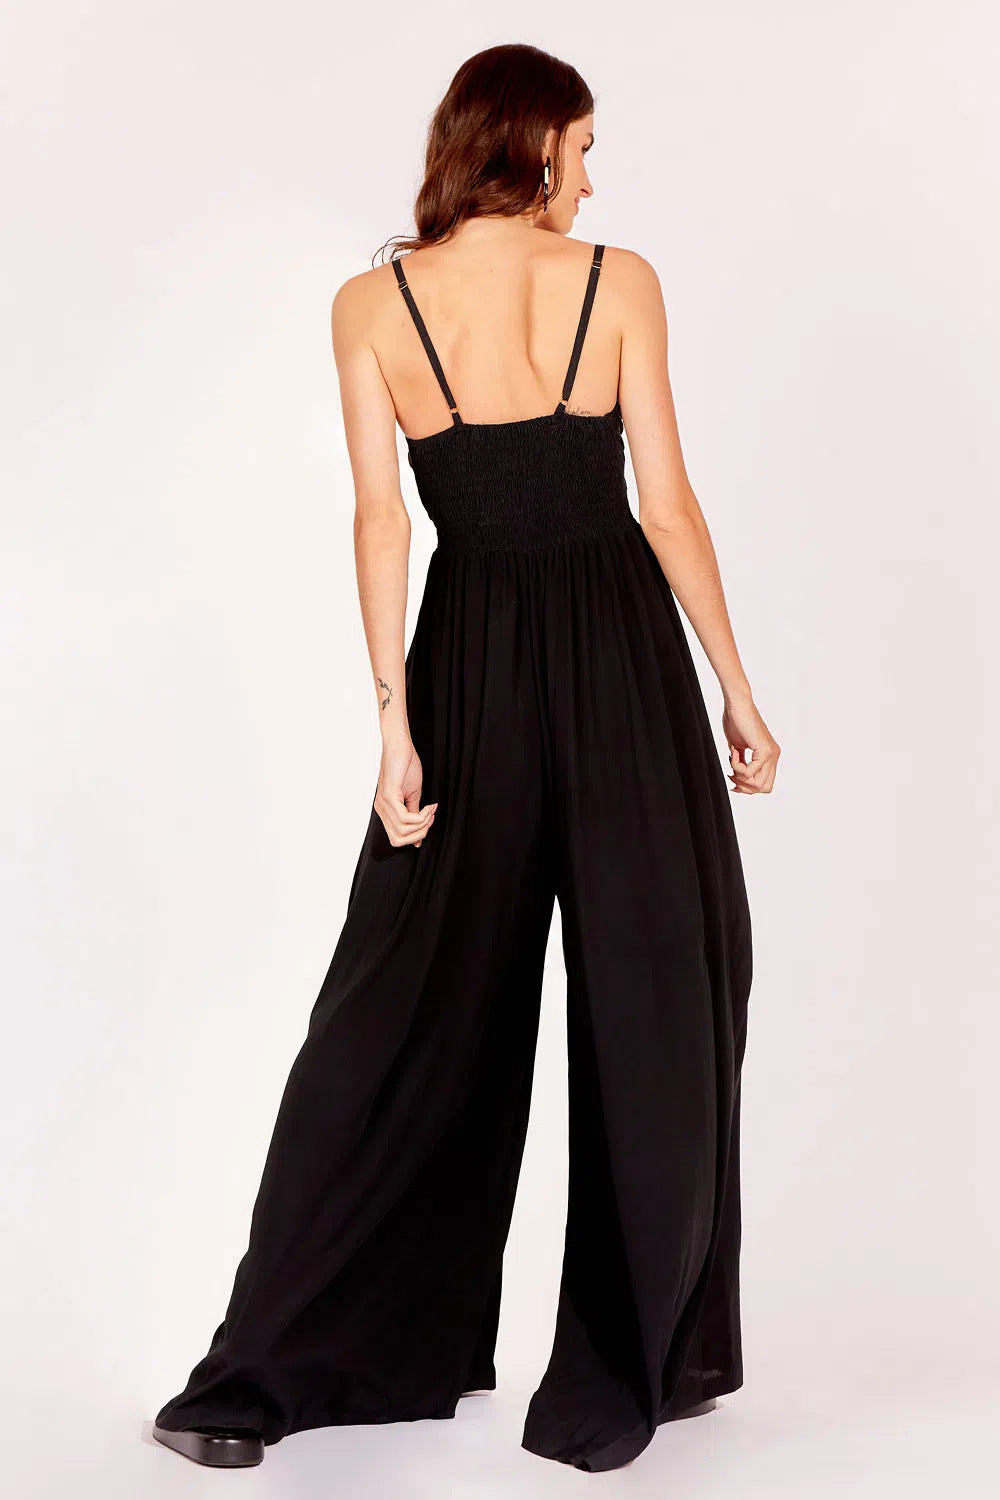 Summer Fashion Wide Legs Jumpsuits for Women